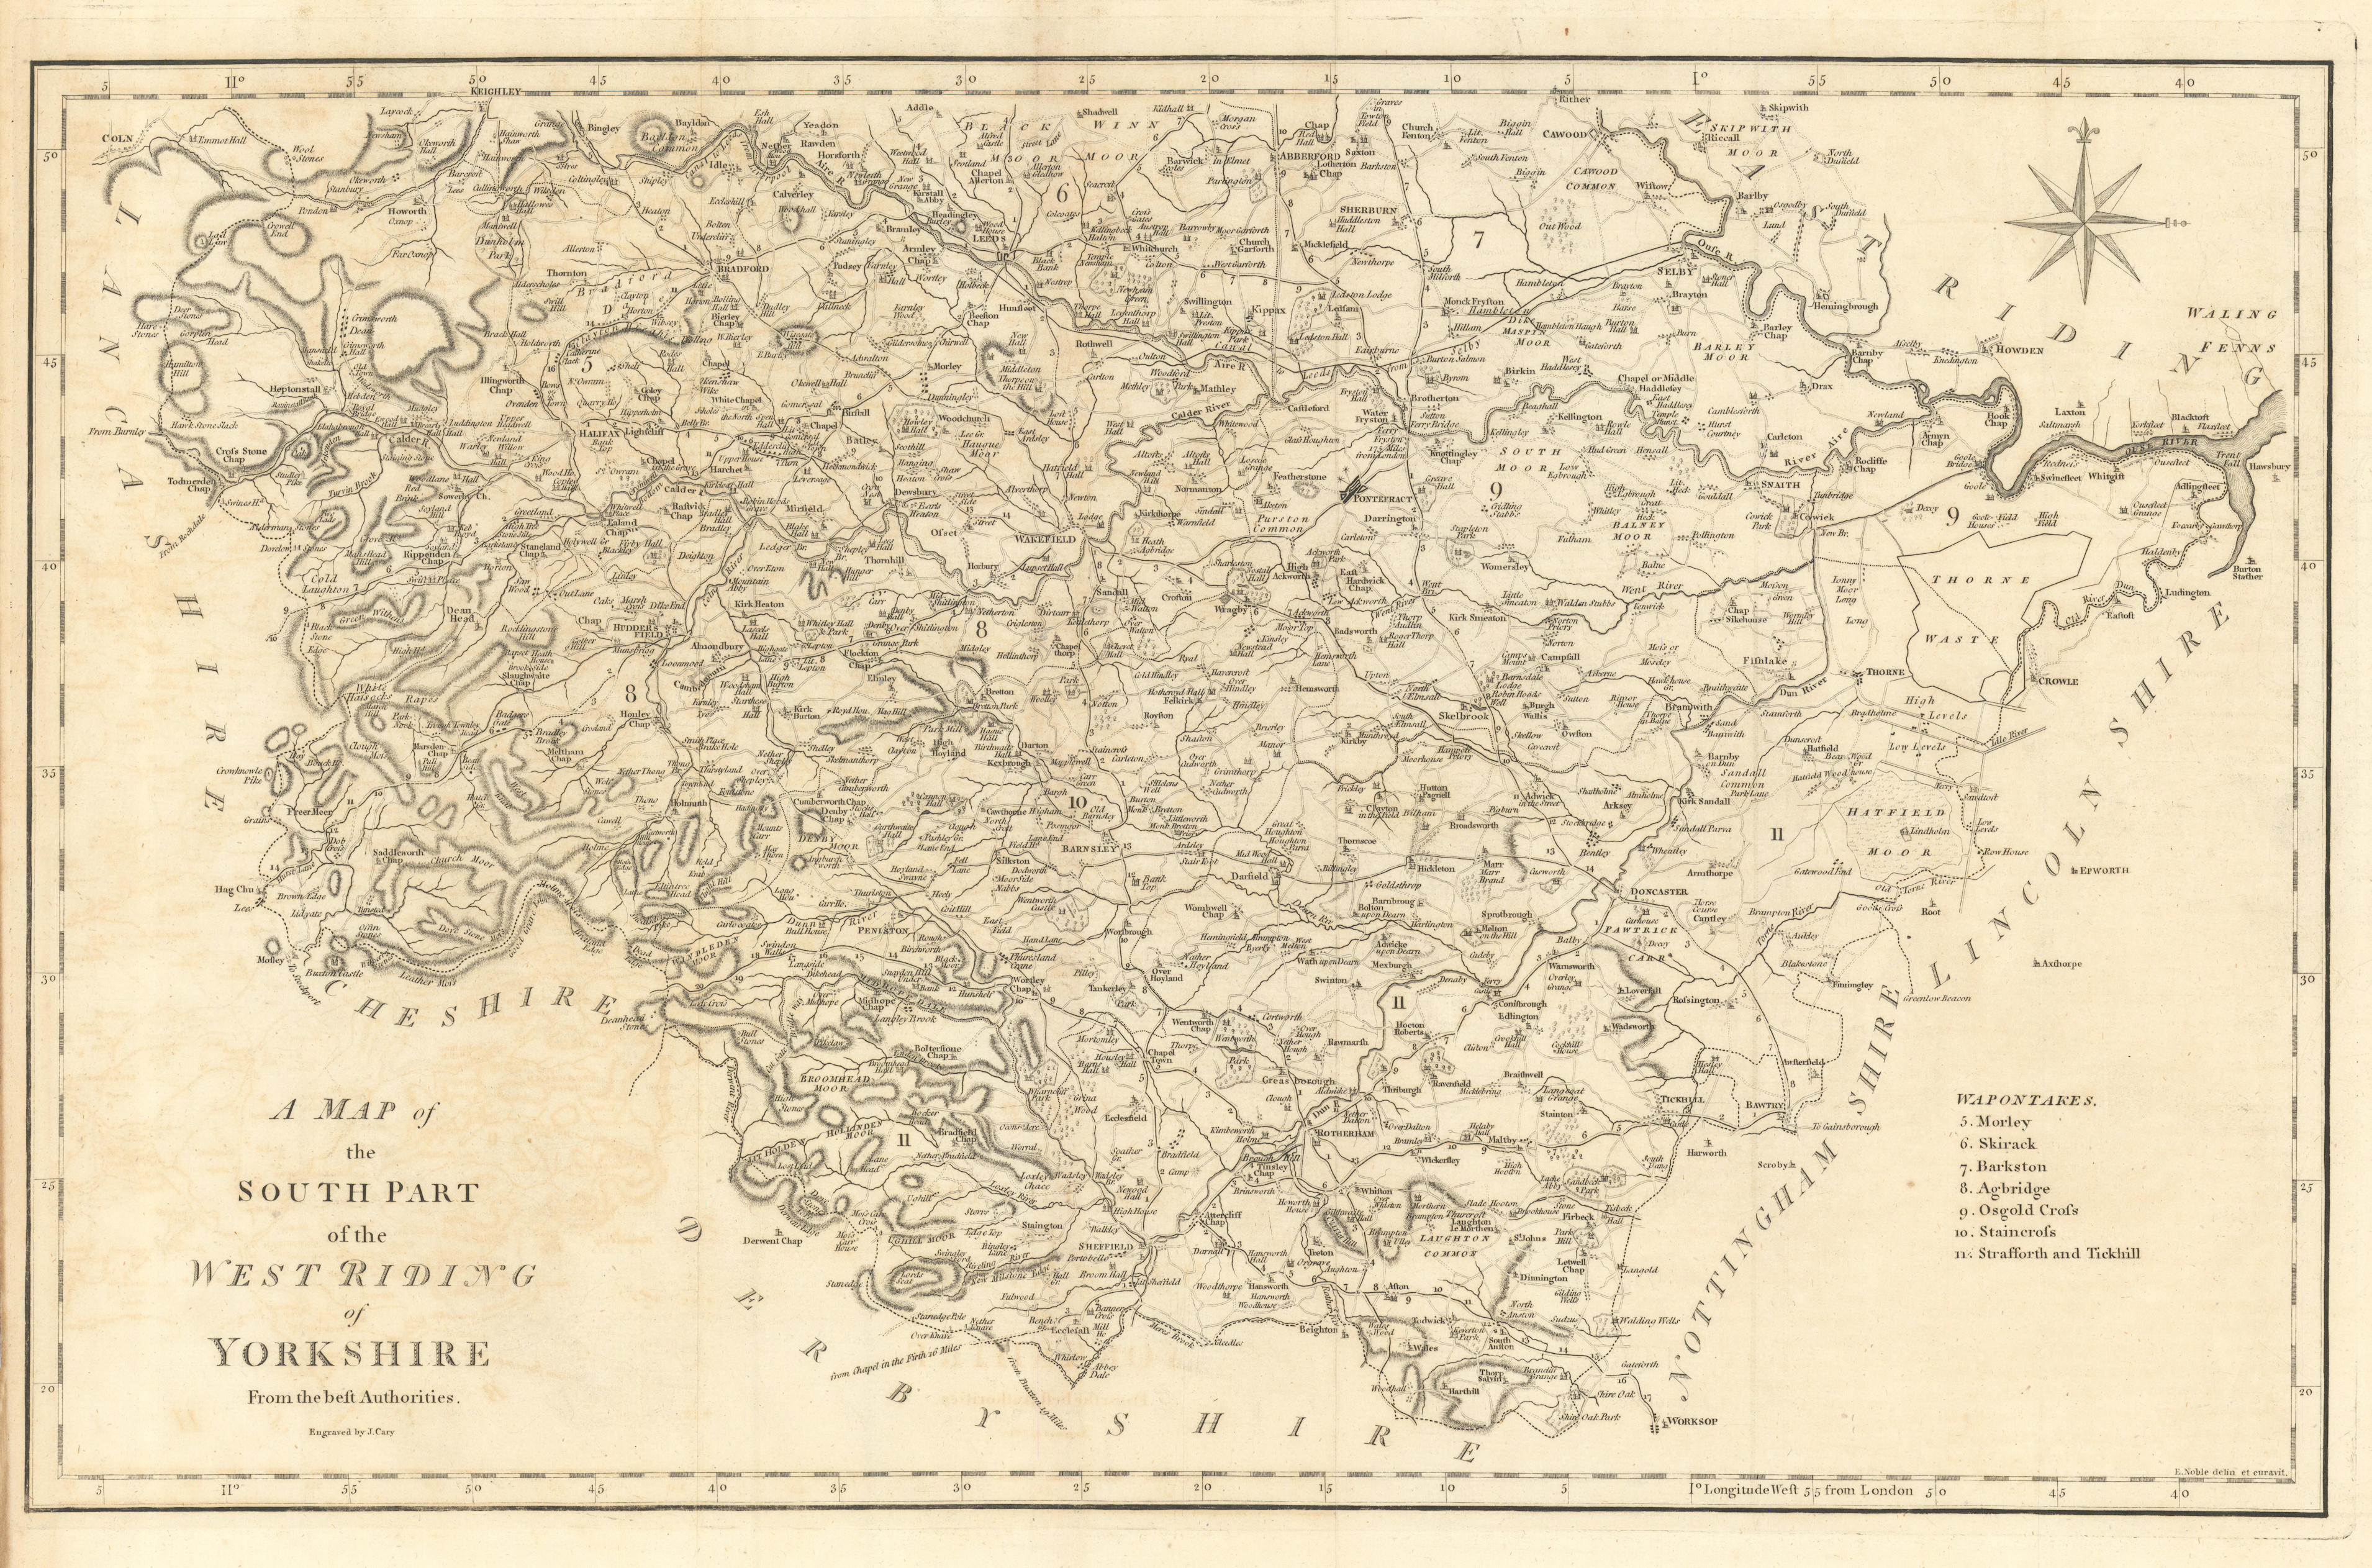 Associate Product "A map of the South part of the West Riding of Yorkshire…" by John CARY 1789